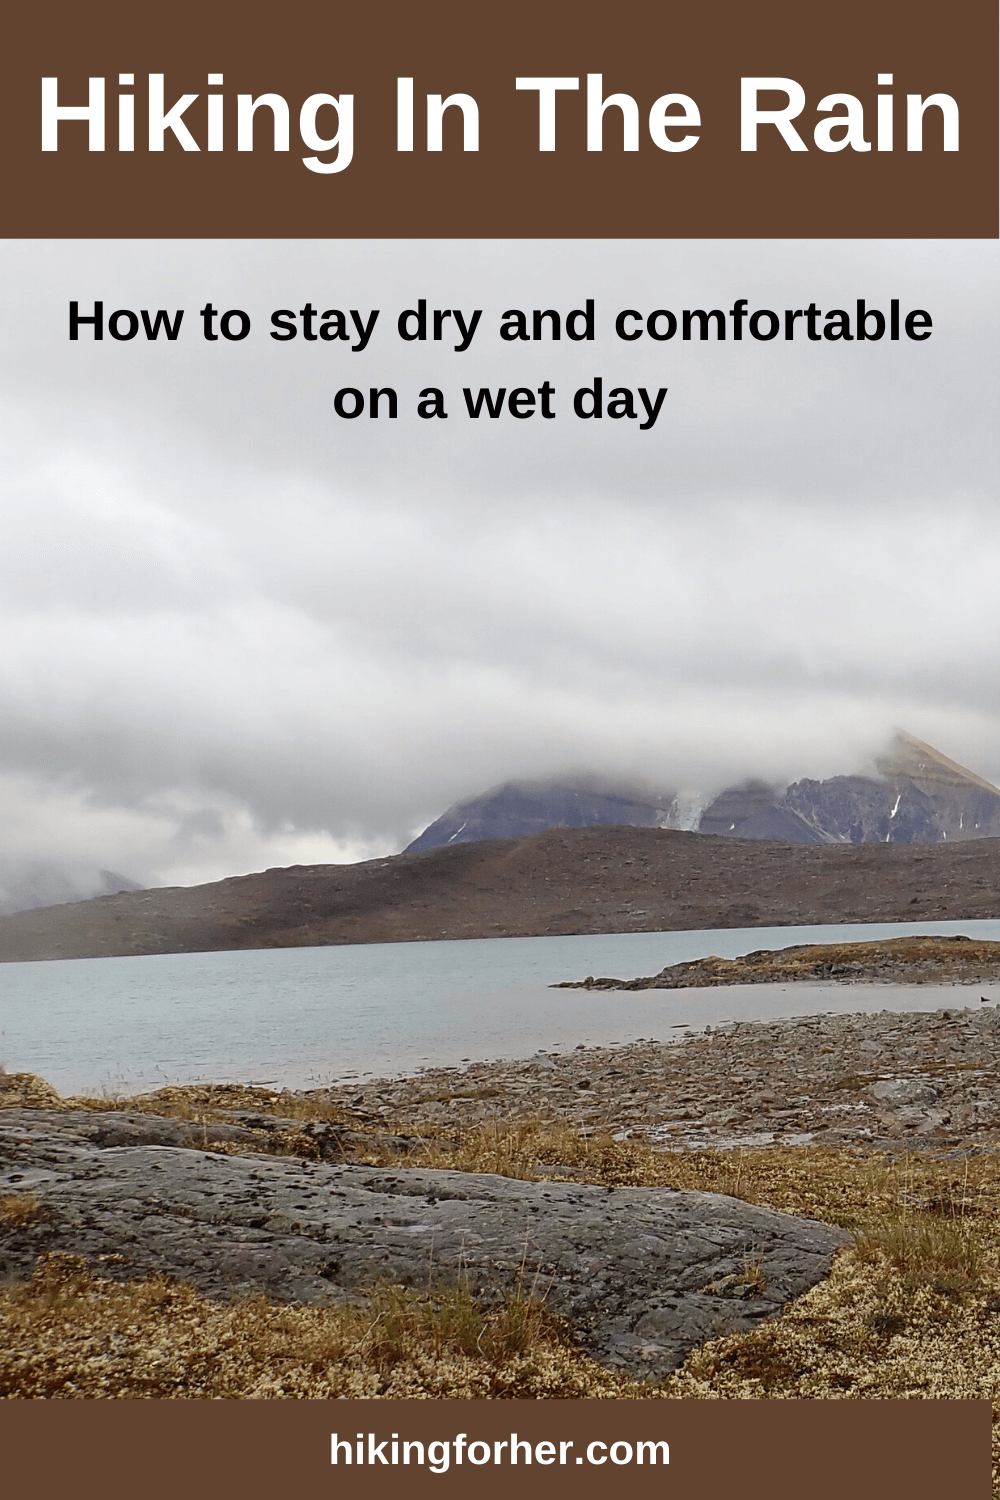 Tips for Hiking in the Rain